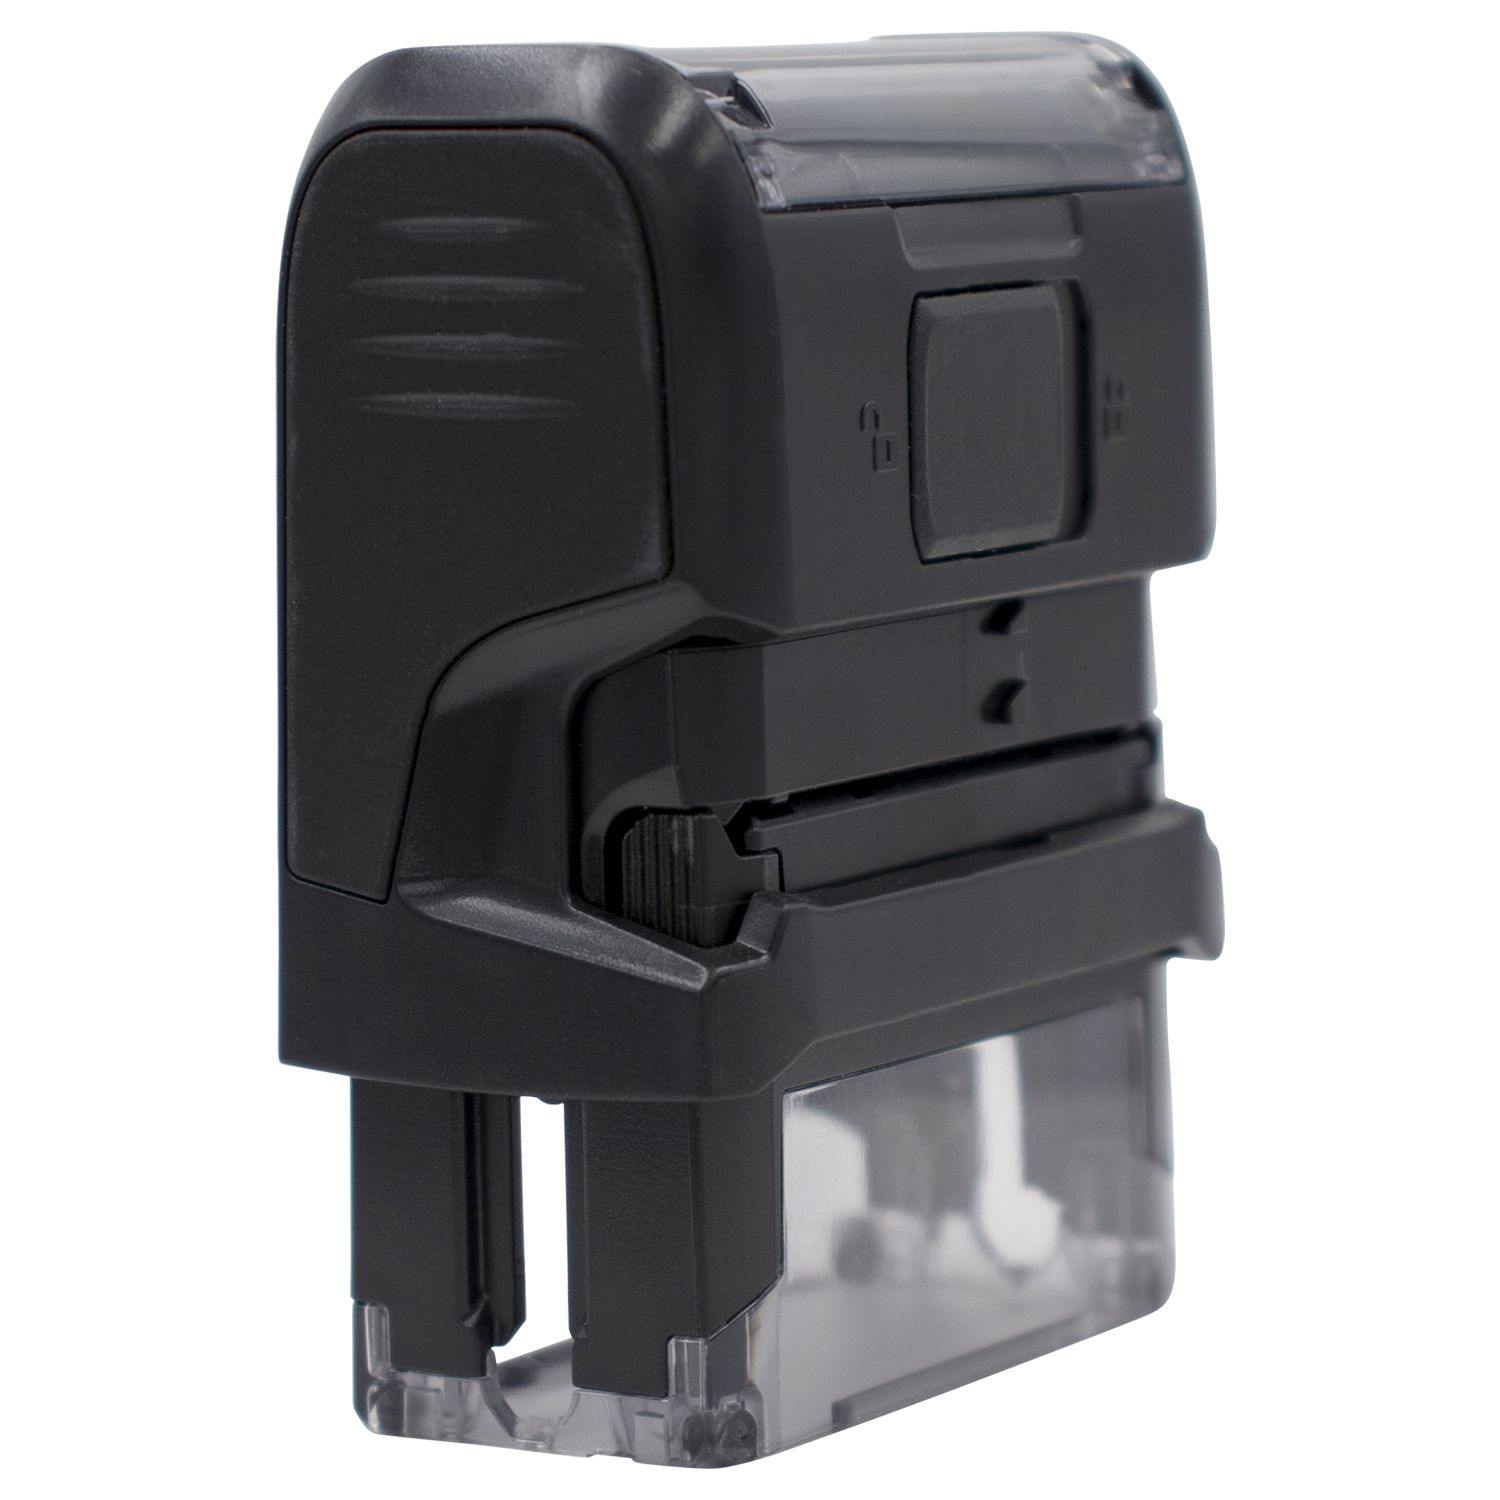 Large Self-Inking Duplicado Stamp - Engineer Seal Stamps - Brand_Trodat, Impression Size_Large, Stamp Type_Self-Inking Stamp, Type of Use_General, Type of Use_Office